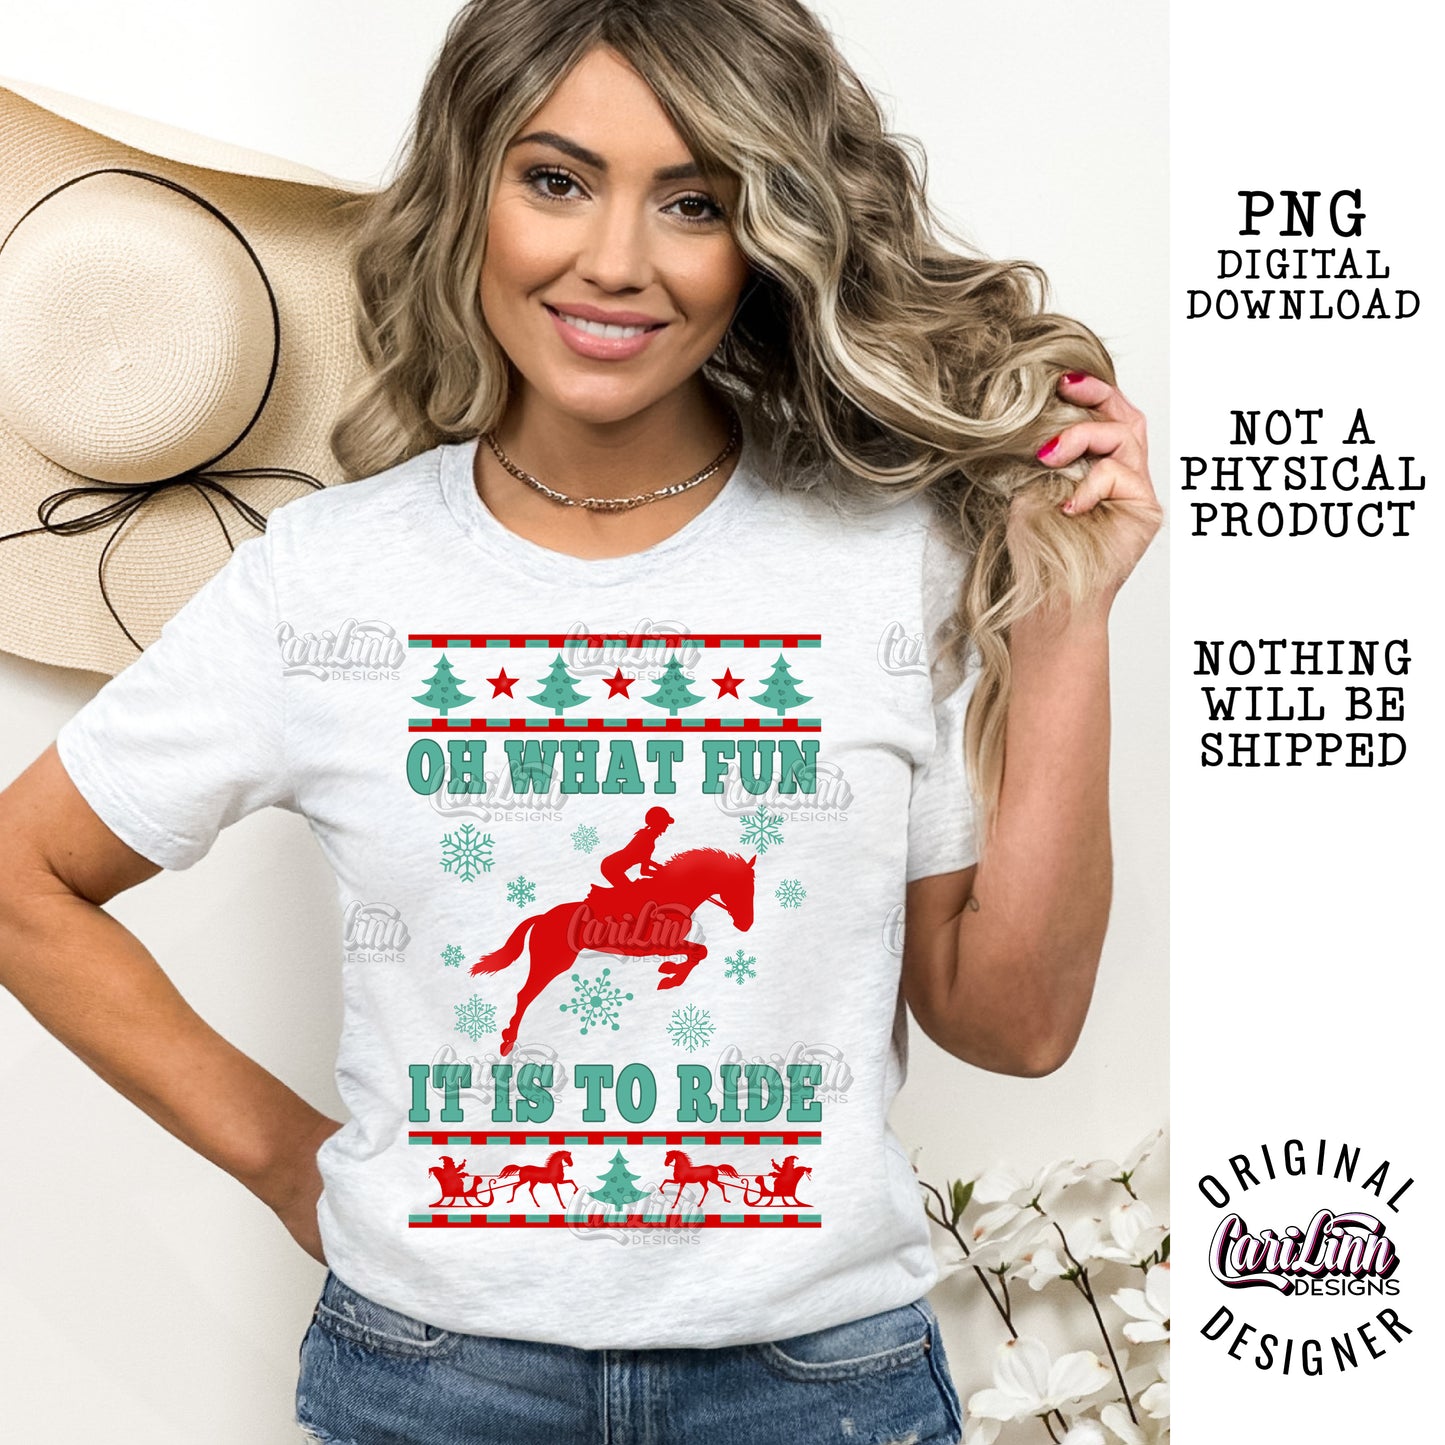 Oh What Fun it is to Ride, Female horse rider, Jumper, PNG Digital Dow ...